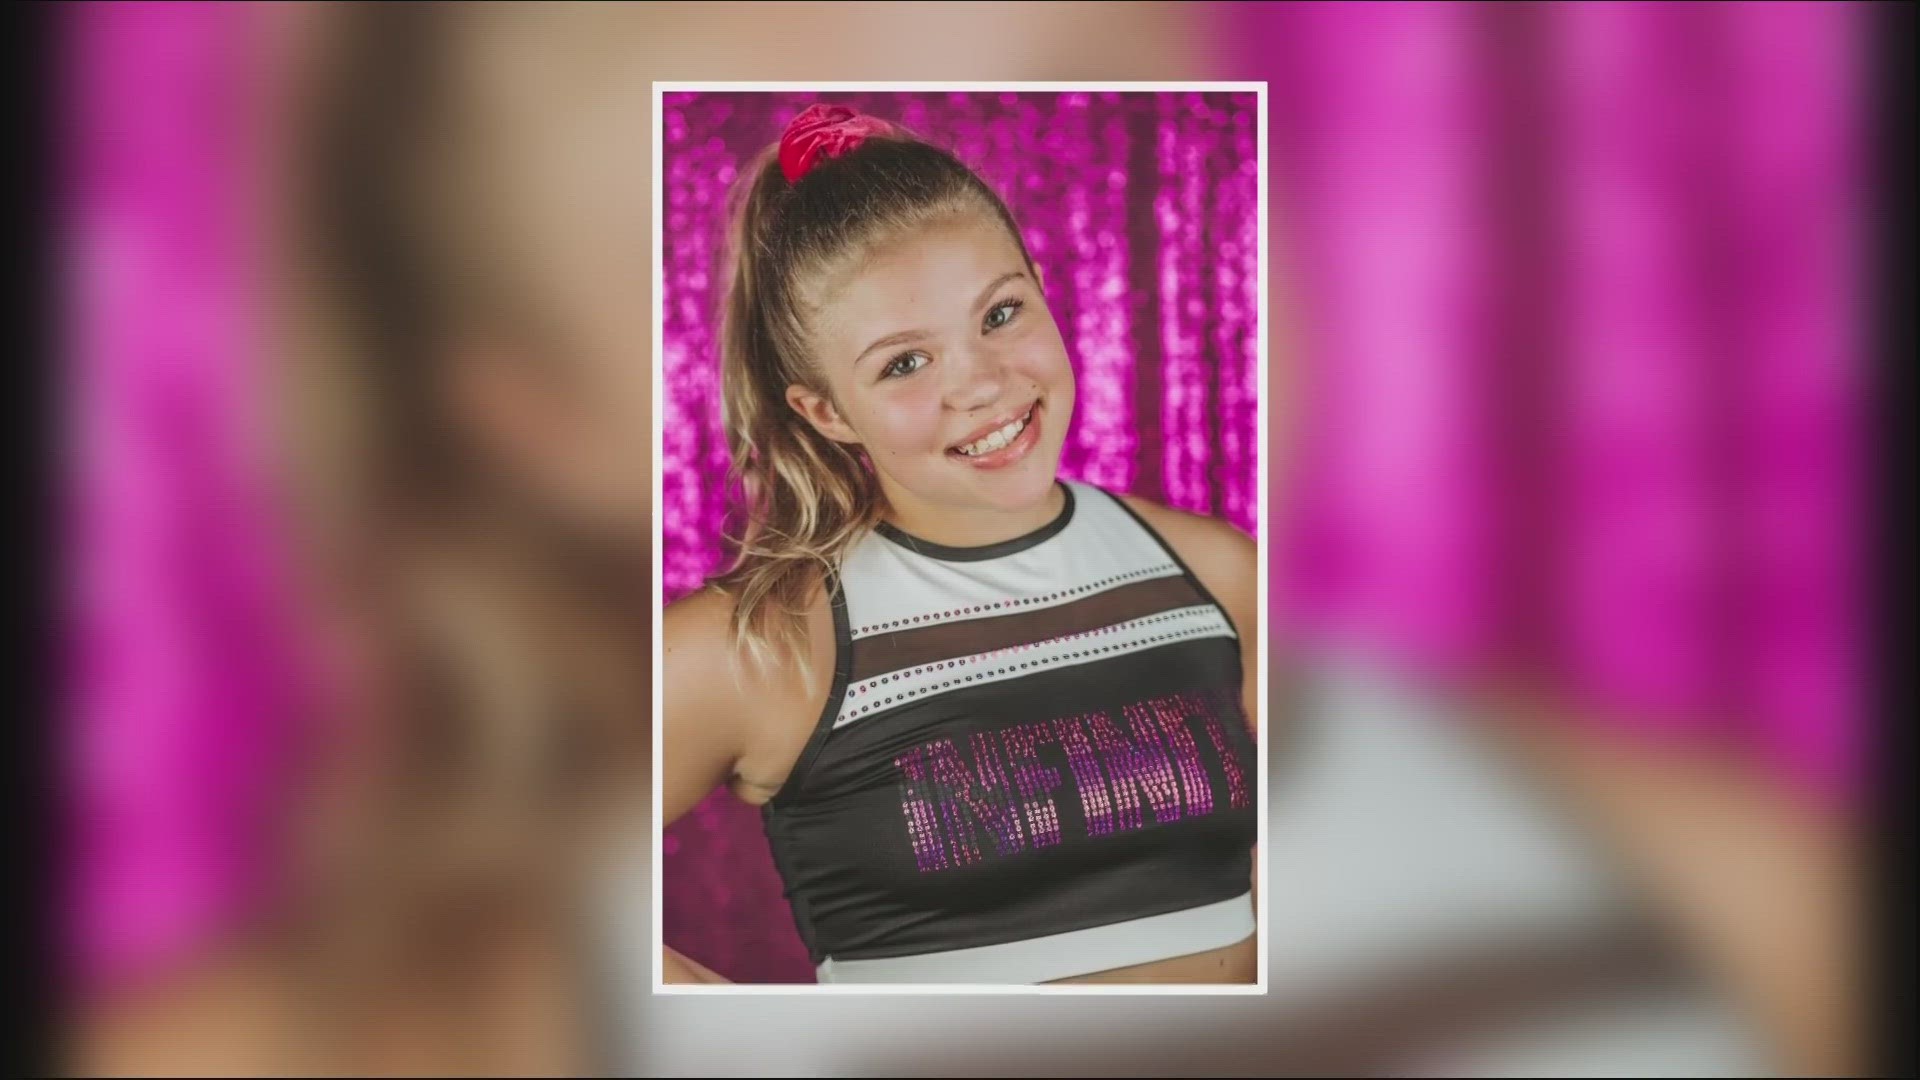 The sentencing for Tristyn's killer this week is expected to bring attention from national media. But it's her life - not her death - her family wants remembered.